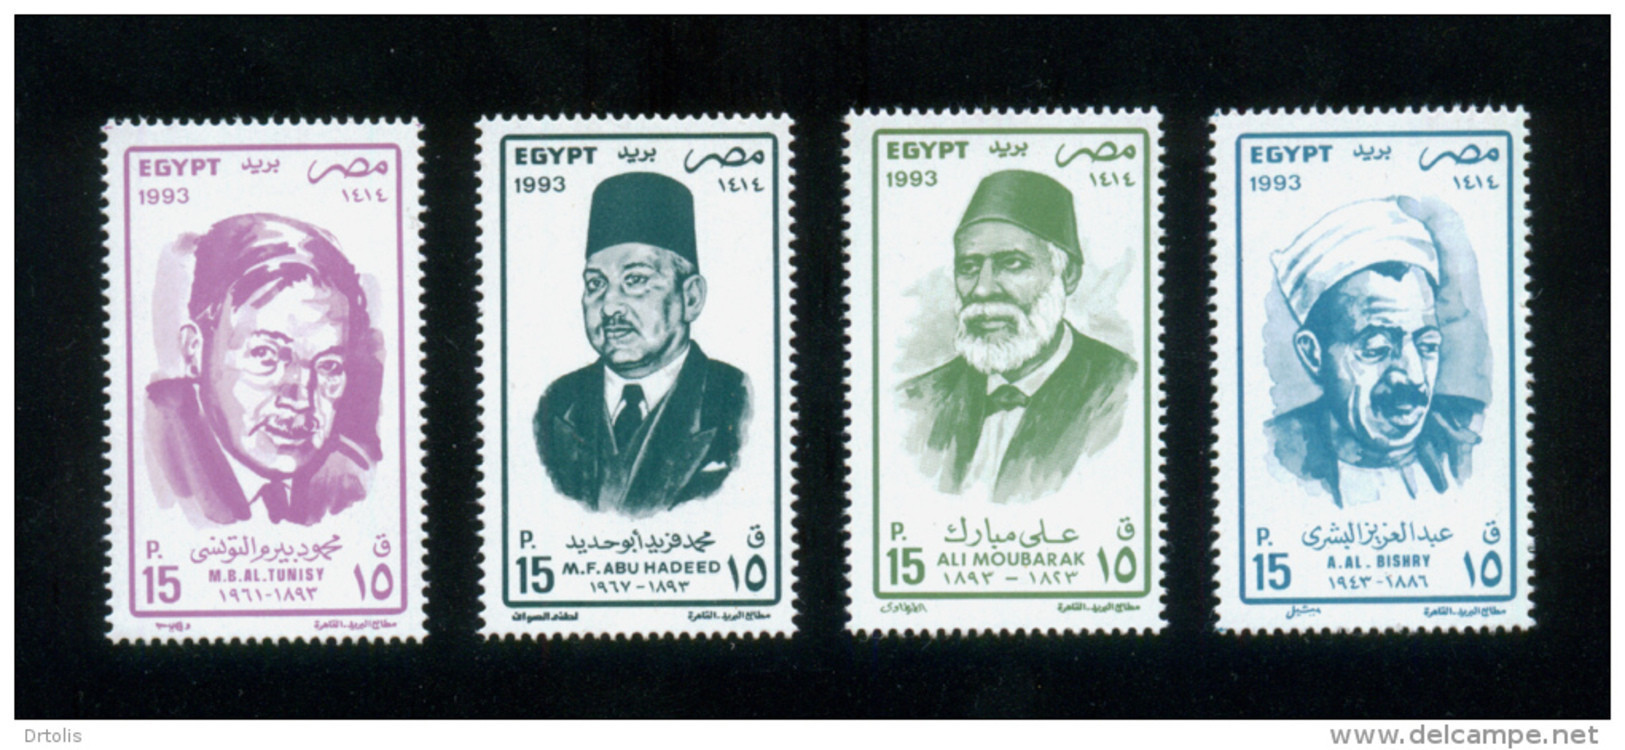 EGYPT / 1993 / COMPLETE YEAR ISSUES / MNH / VF/ 10 SCANS - Neufs